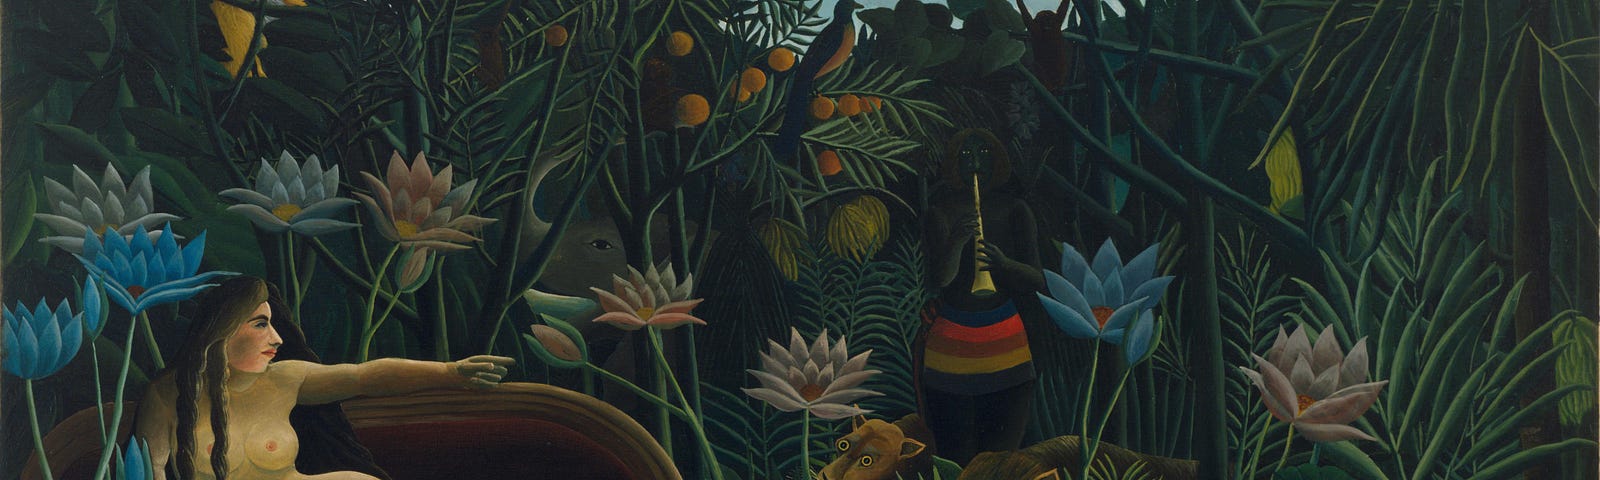 The Dream (1910), by Henri Rousseau. Oil on canvas, 204.5 x 298.5 cm (80.5 x 117.5 in). Museum of Modern Art, New York City. PD-US